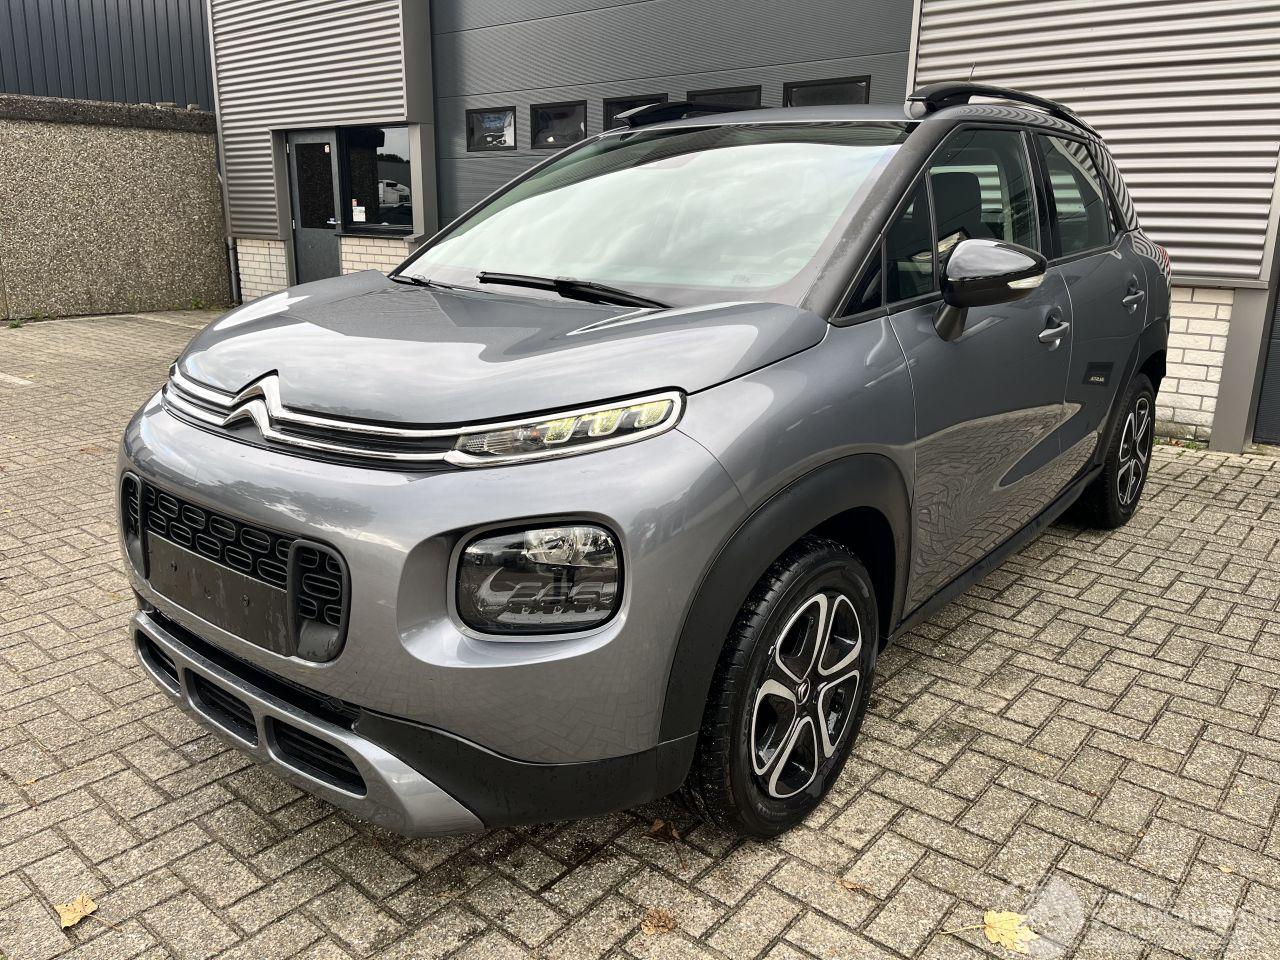 Citroën C3 Aircross 1.2 Pure-tech AUTOMAAT / CLIMA / CRUISE / PDC